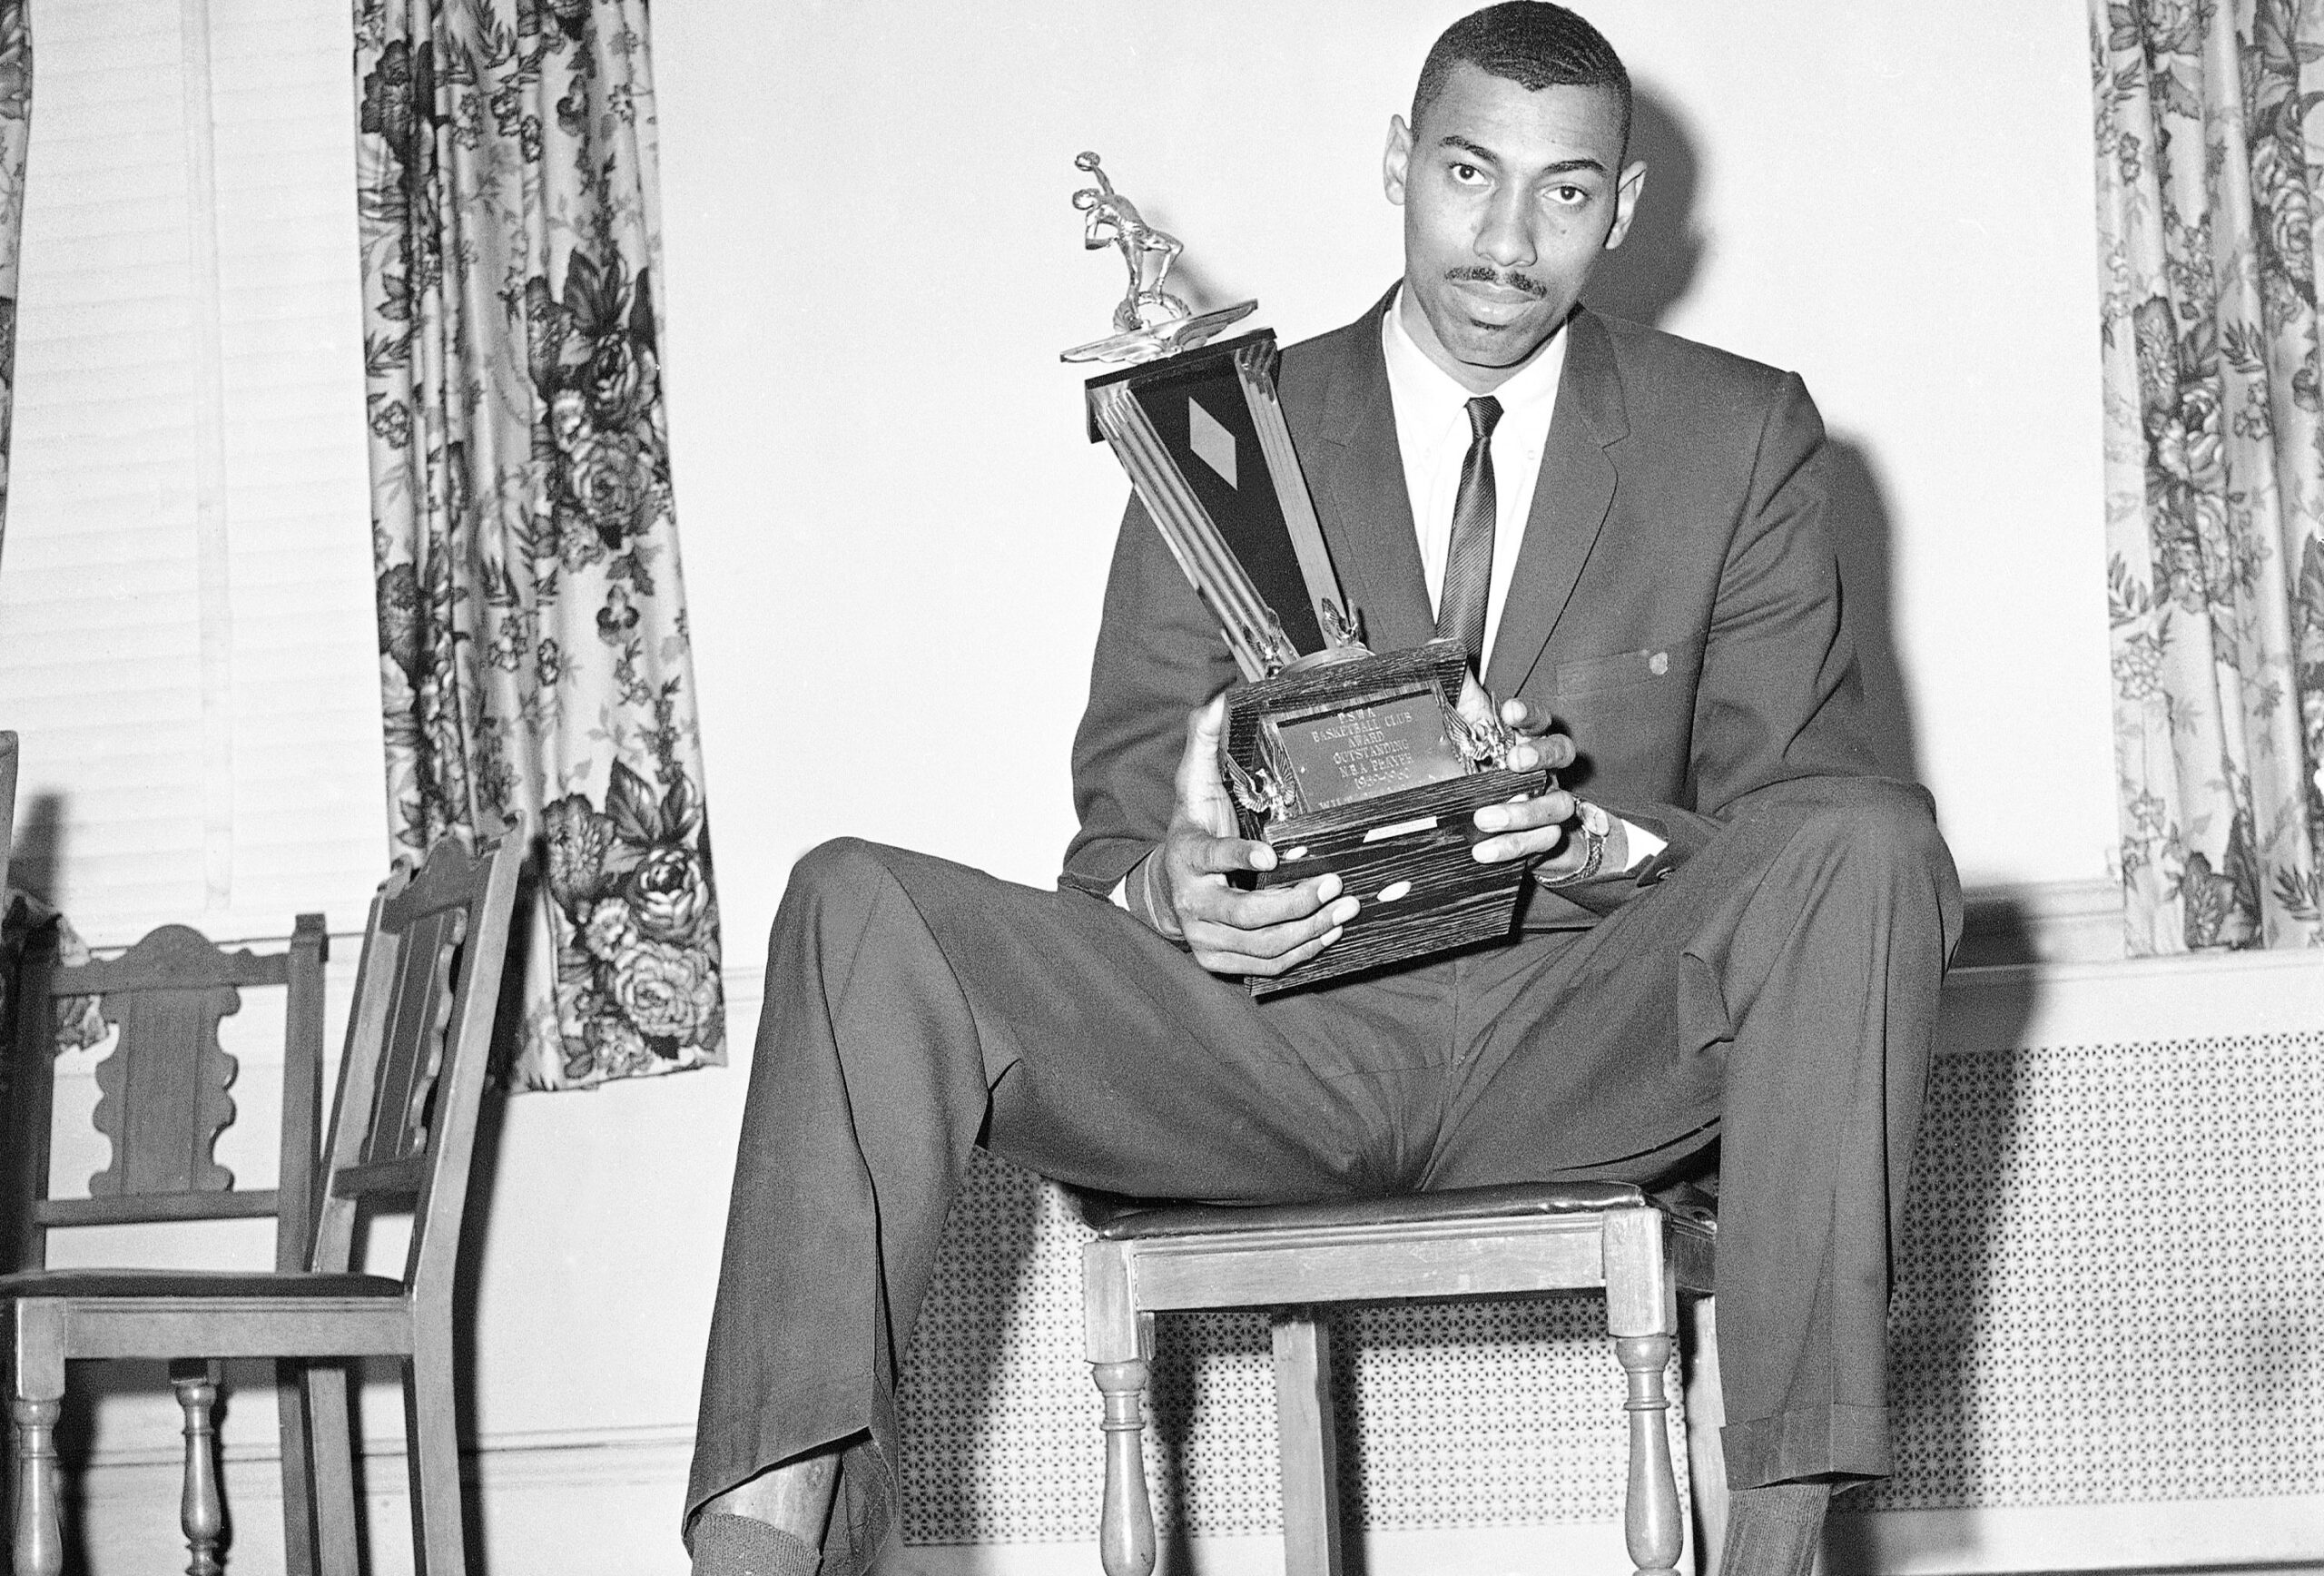 Wilt Chamberlain is shown with trophy he received from the Philadelphia Sports Writers Association Basketball Club in Philadelphia, March 28, 1960. Photo credit: Sam Myers, The Associated Press